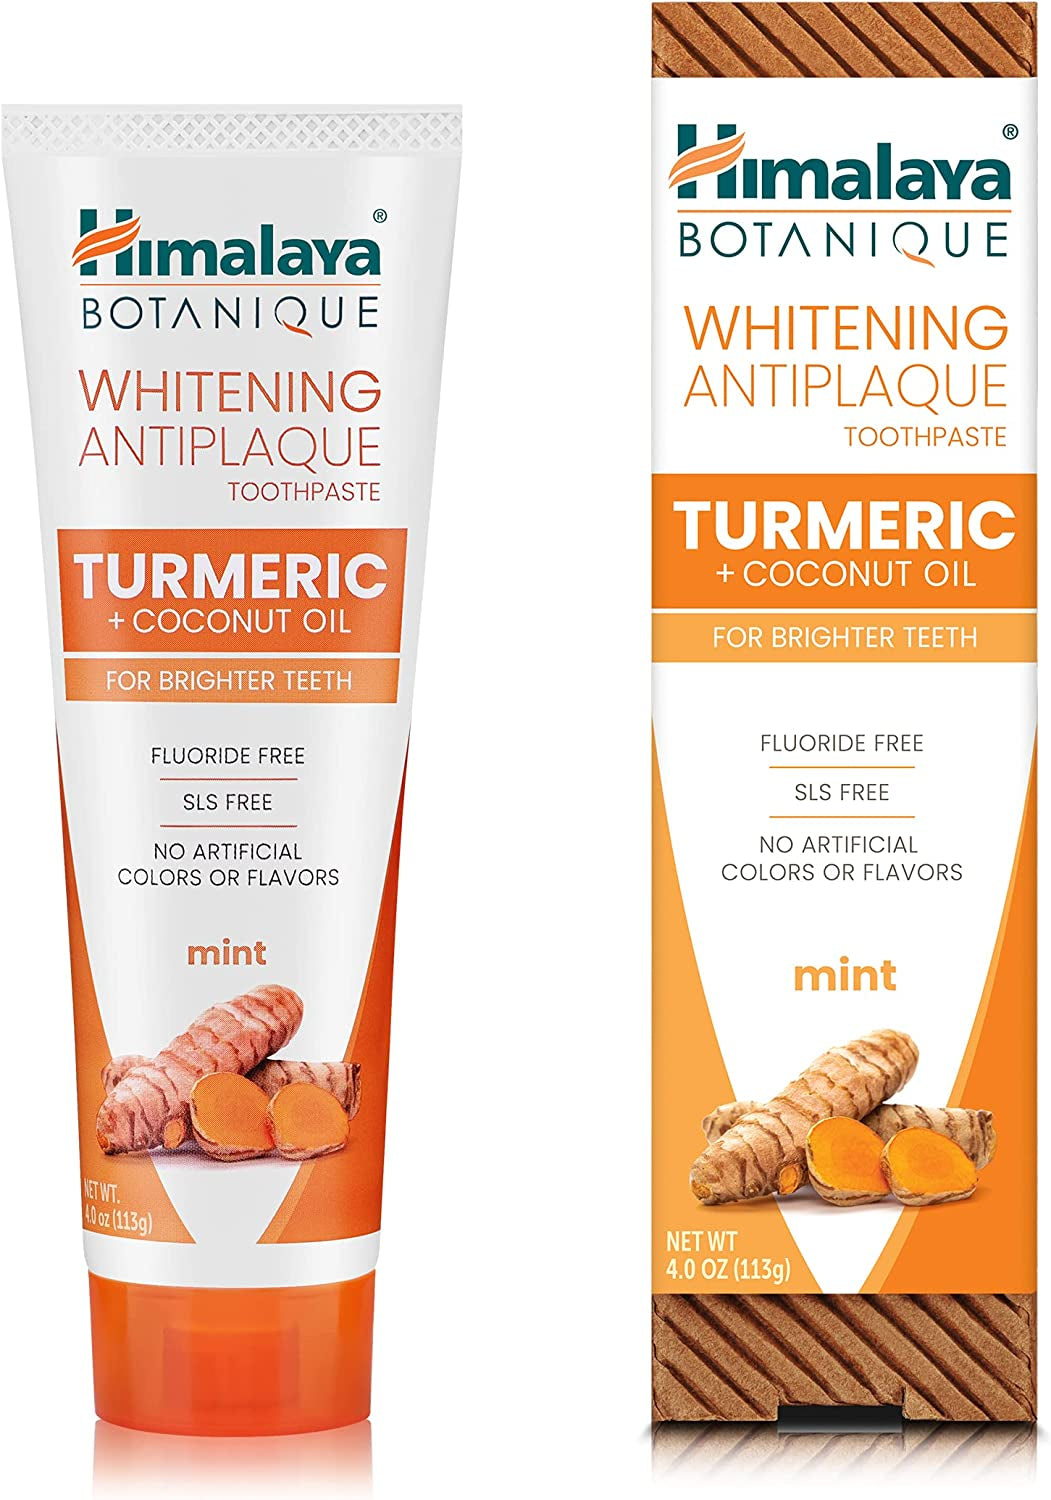 Botanique Turmeric & Coconut Oil Whitening Antiplaque Herbal Toothpaste, Whitens Teeth, Fluoride Free, No Artificial Flavors, SLS Free, Vegan, Cruelty Free, Foaming, Mint Flavor, 4 Oz, 2 Pack